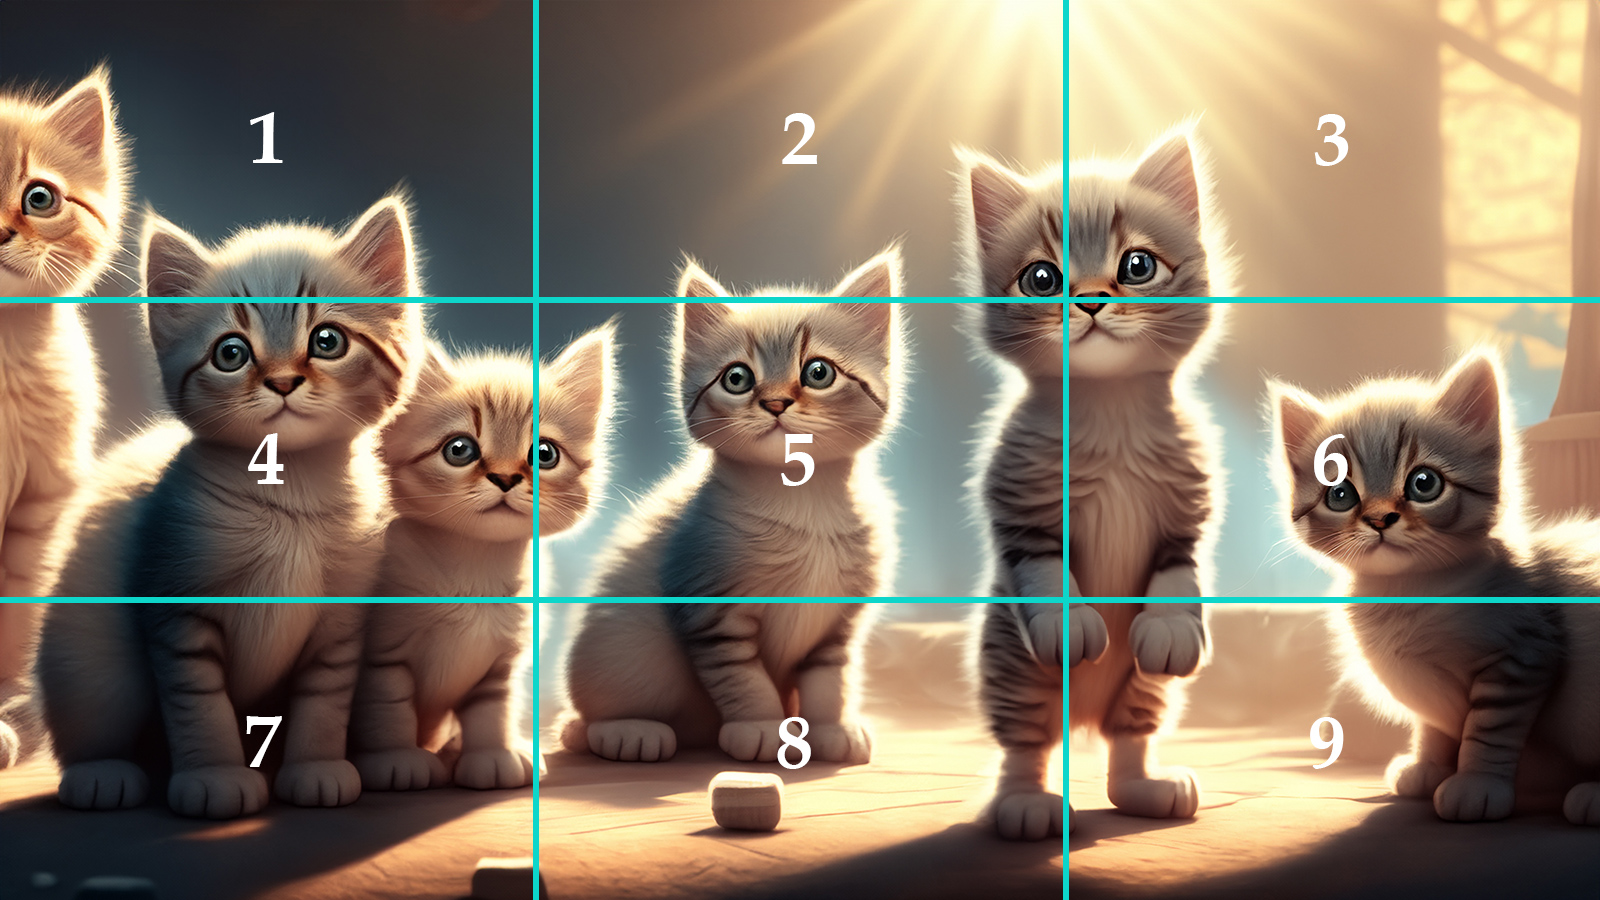 Generated image of cute grids with 3x3 grid overlay